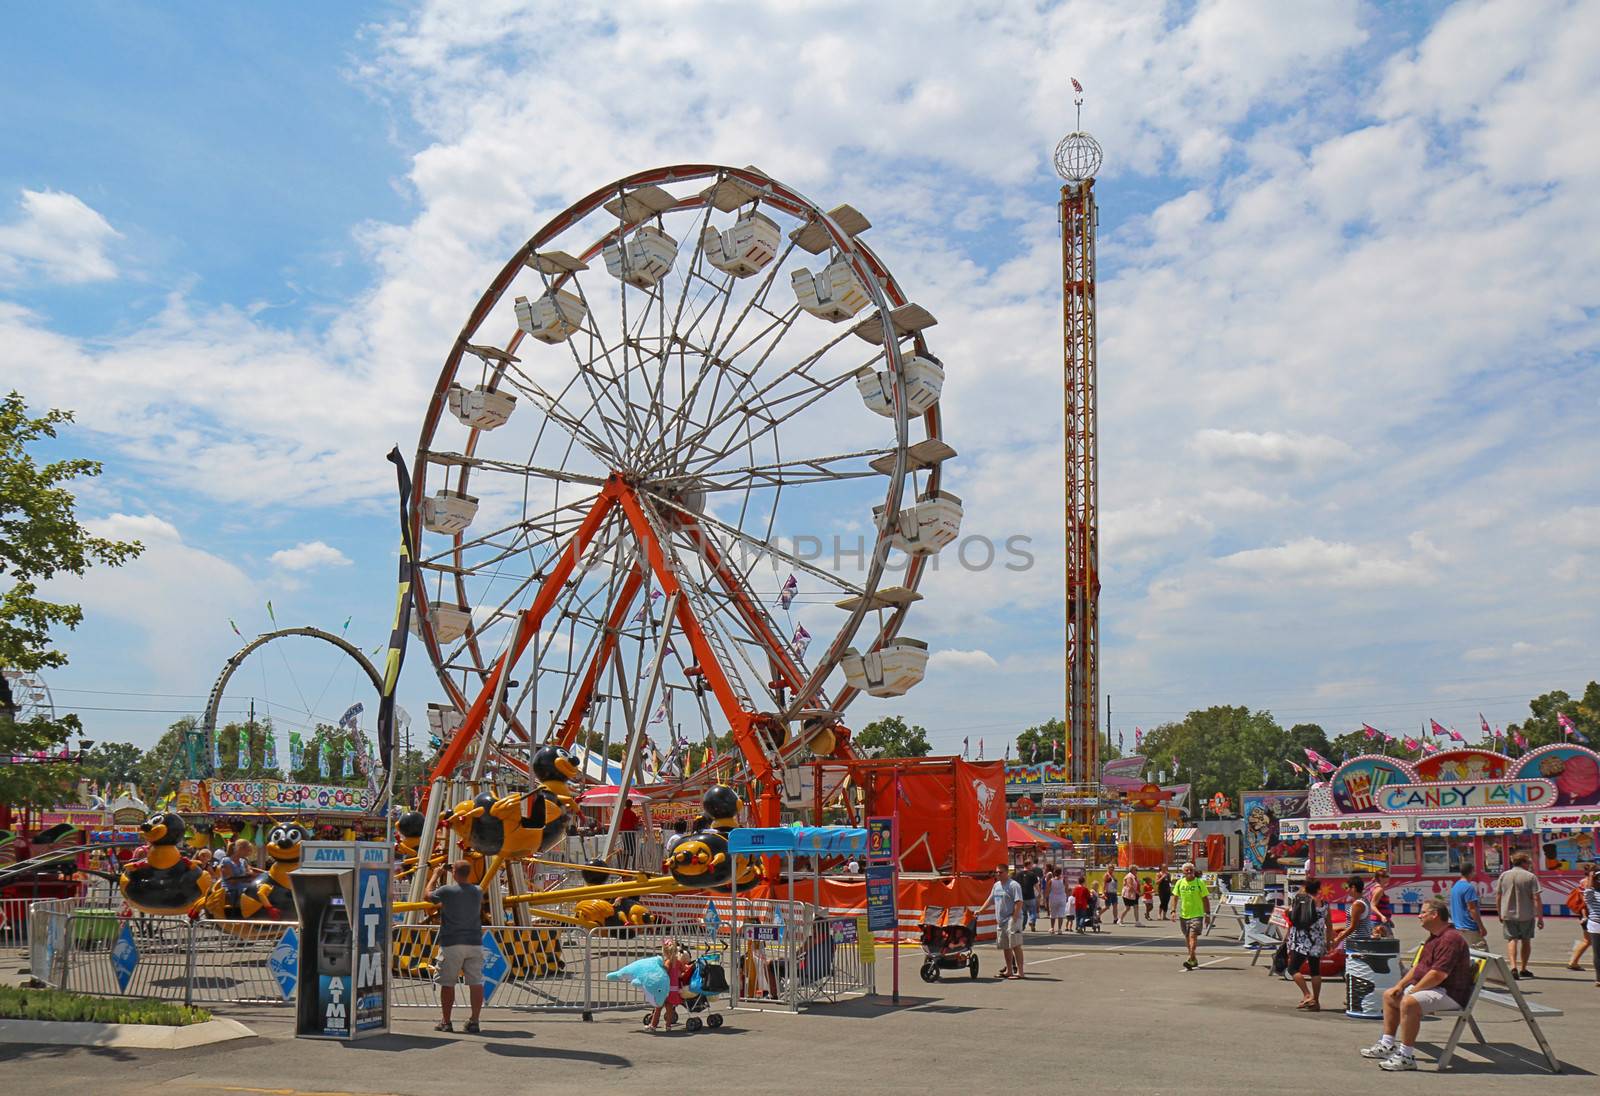 INDIANAPOLIS, INDIANA - AUGUST 12: The ferris wheel and other rides on the Midway at the Indiana State Fair on August 12, 2012. This very popular fair hosts more than 850,000 people every August.